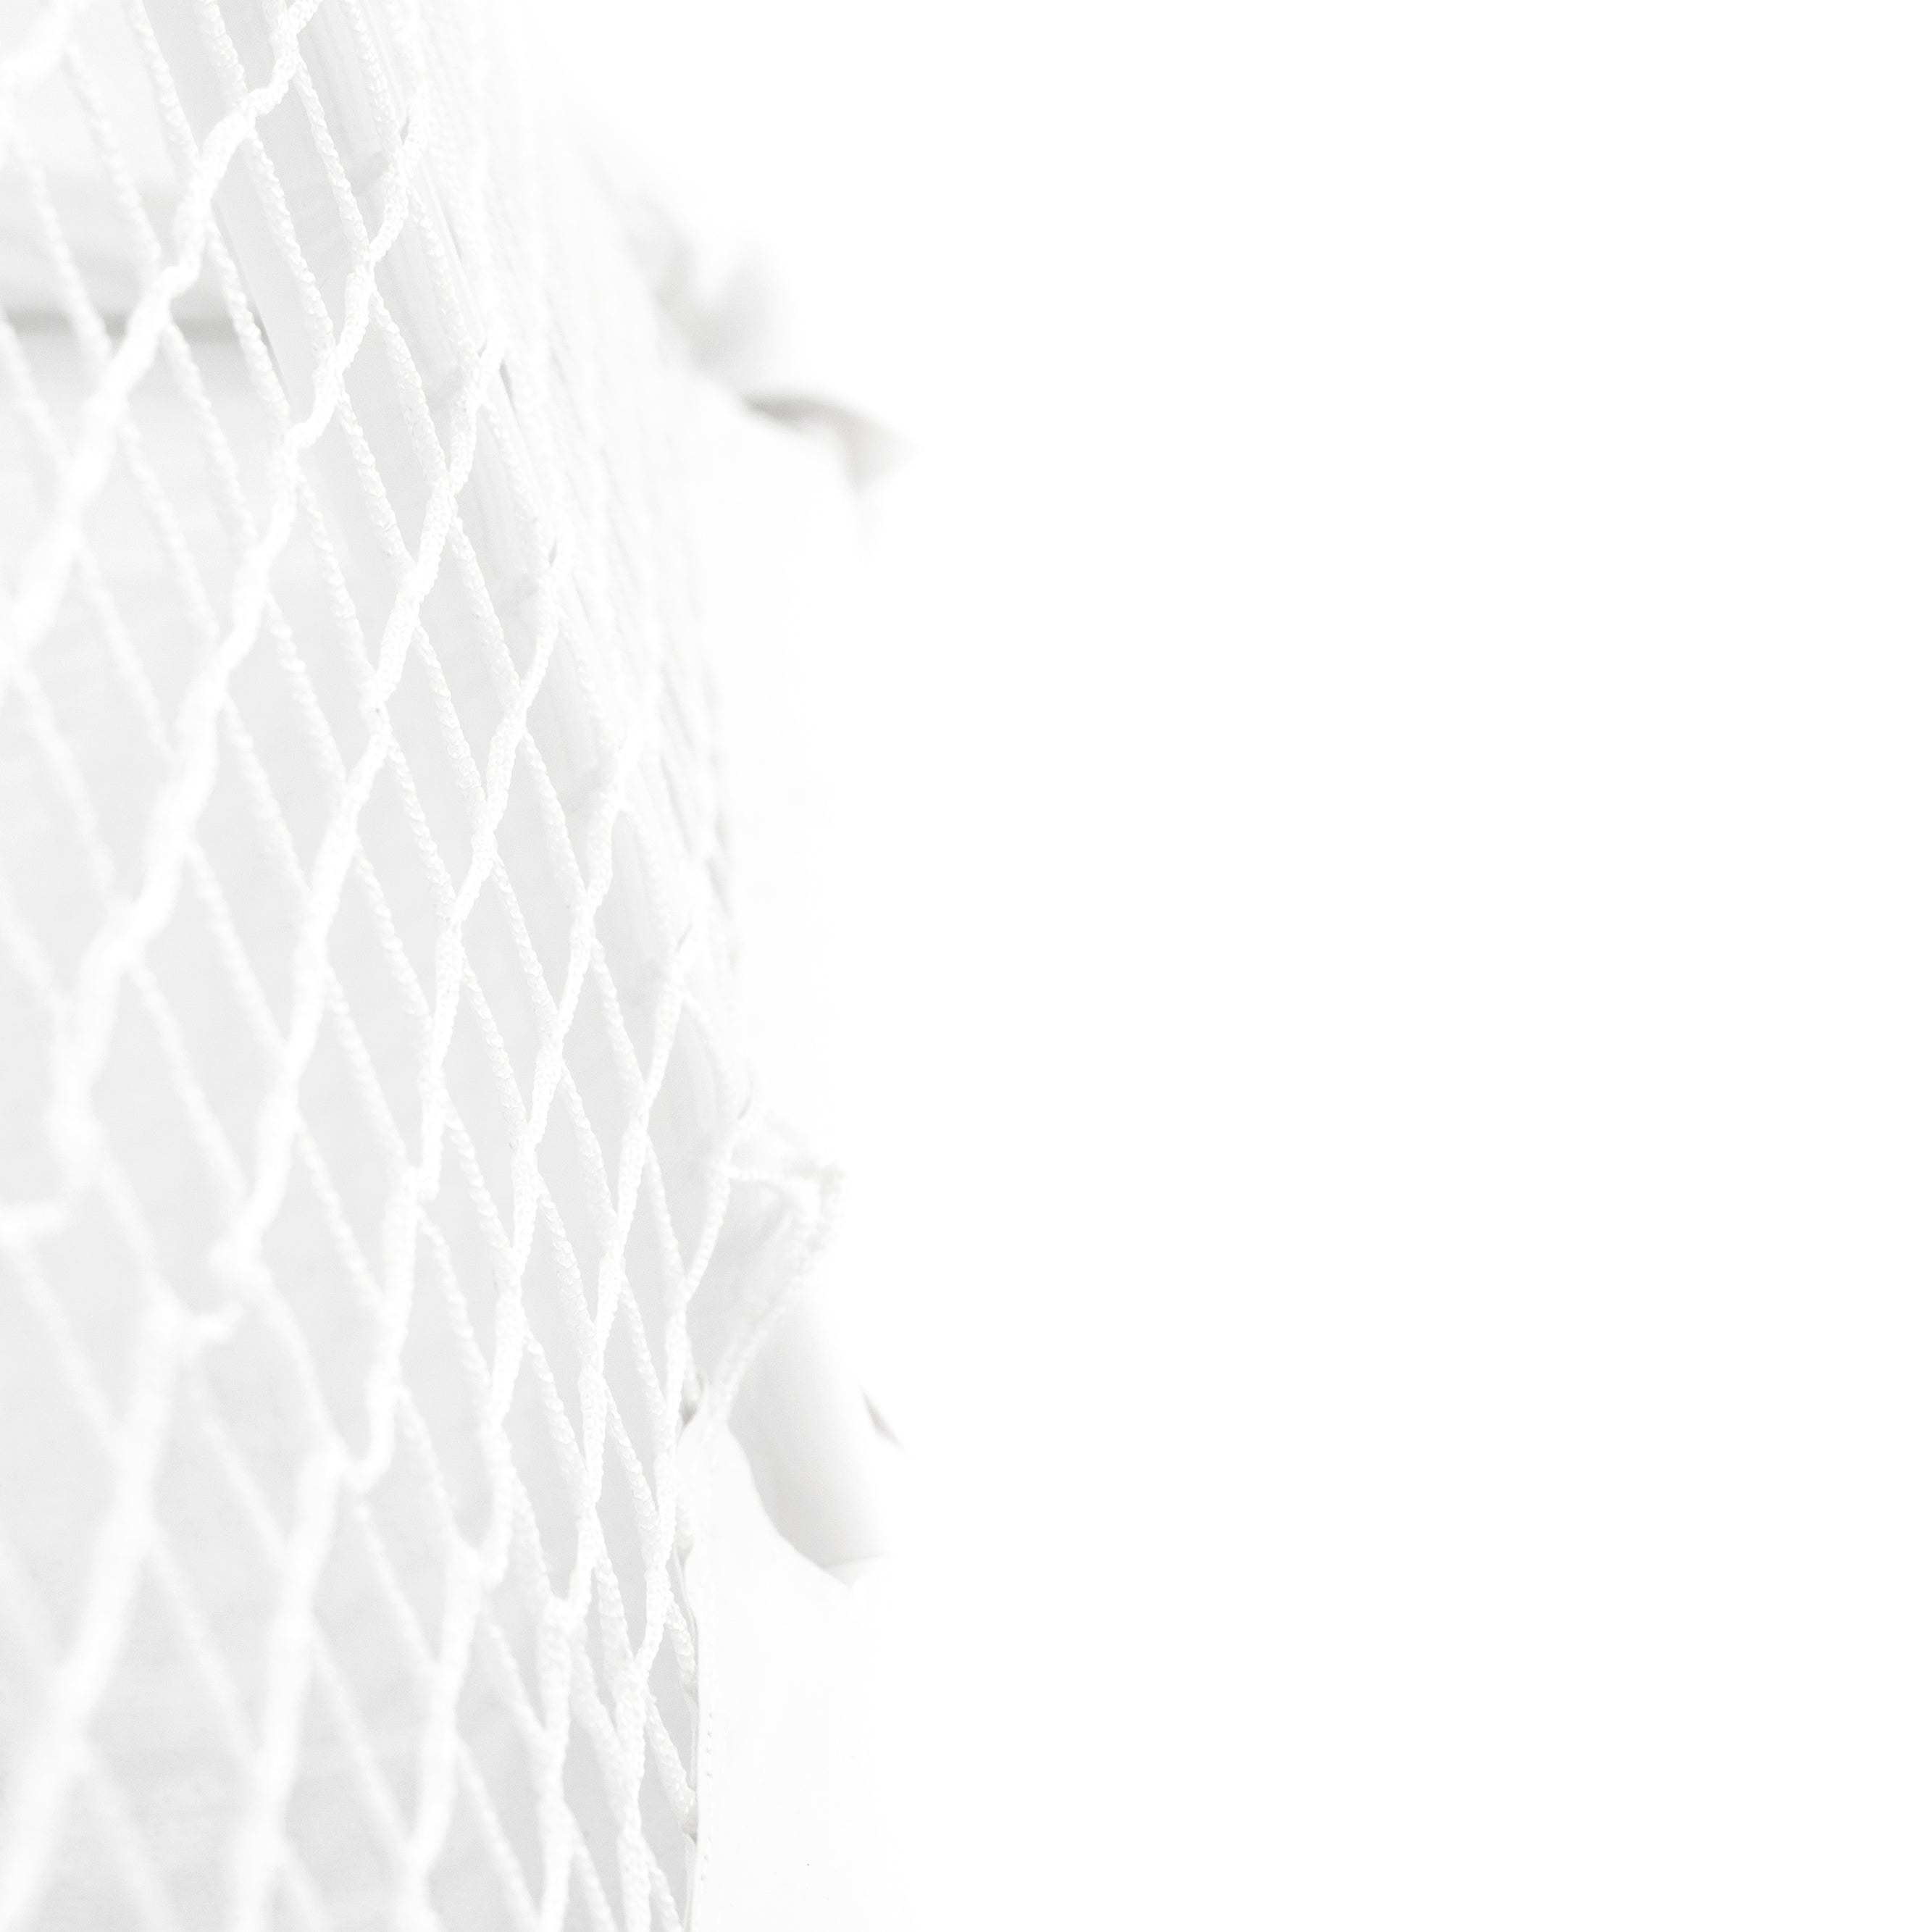 Close-up view of the hockey goal's white polyester net.